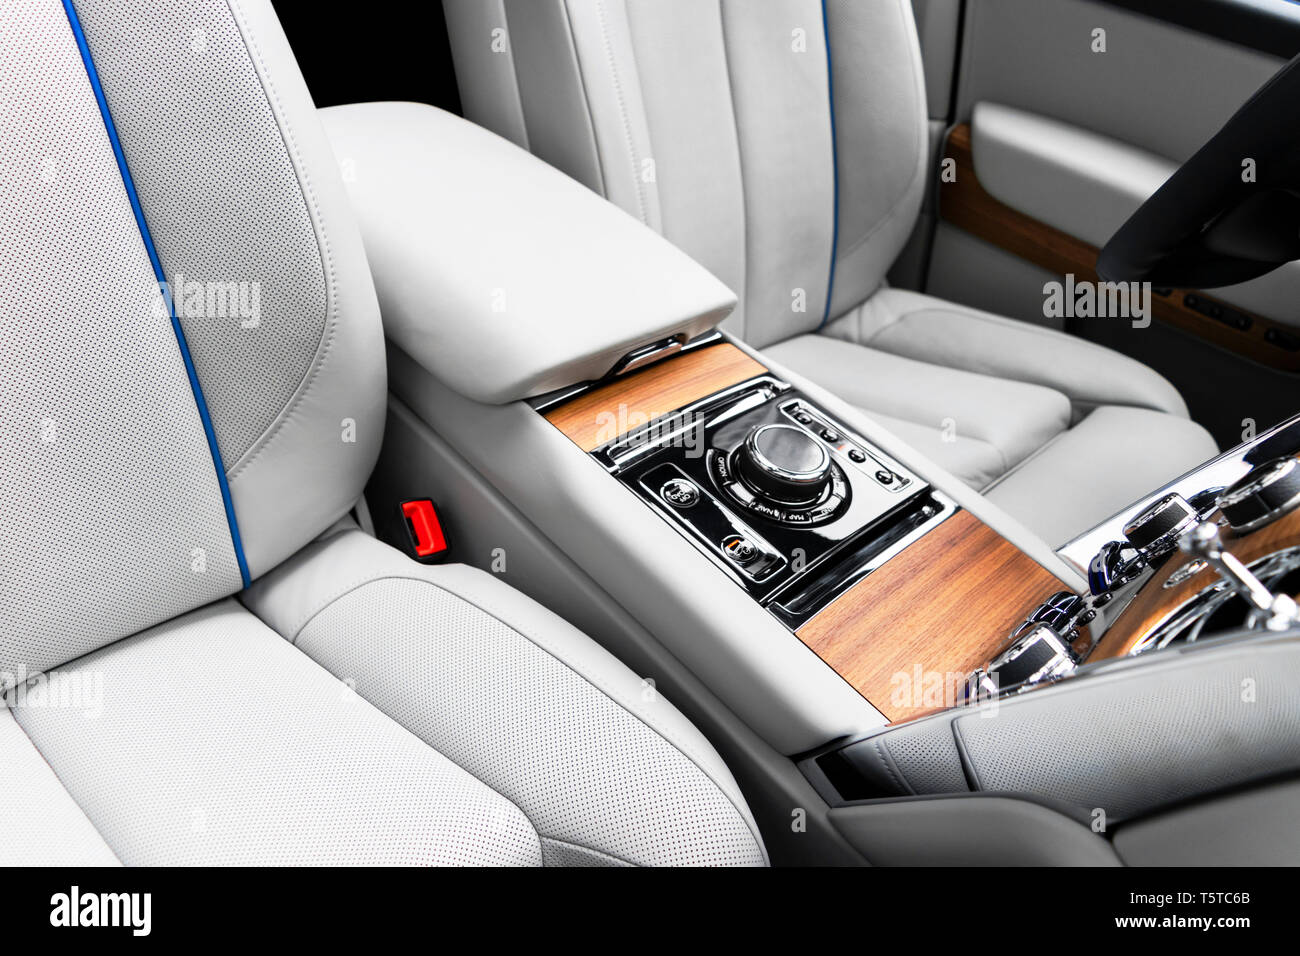 Modern Luxury Car White Leather Interior With Natural Wood